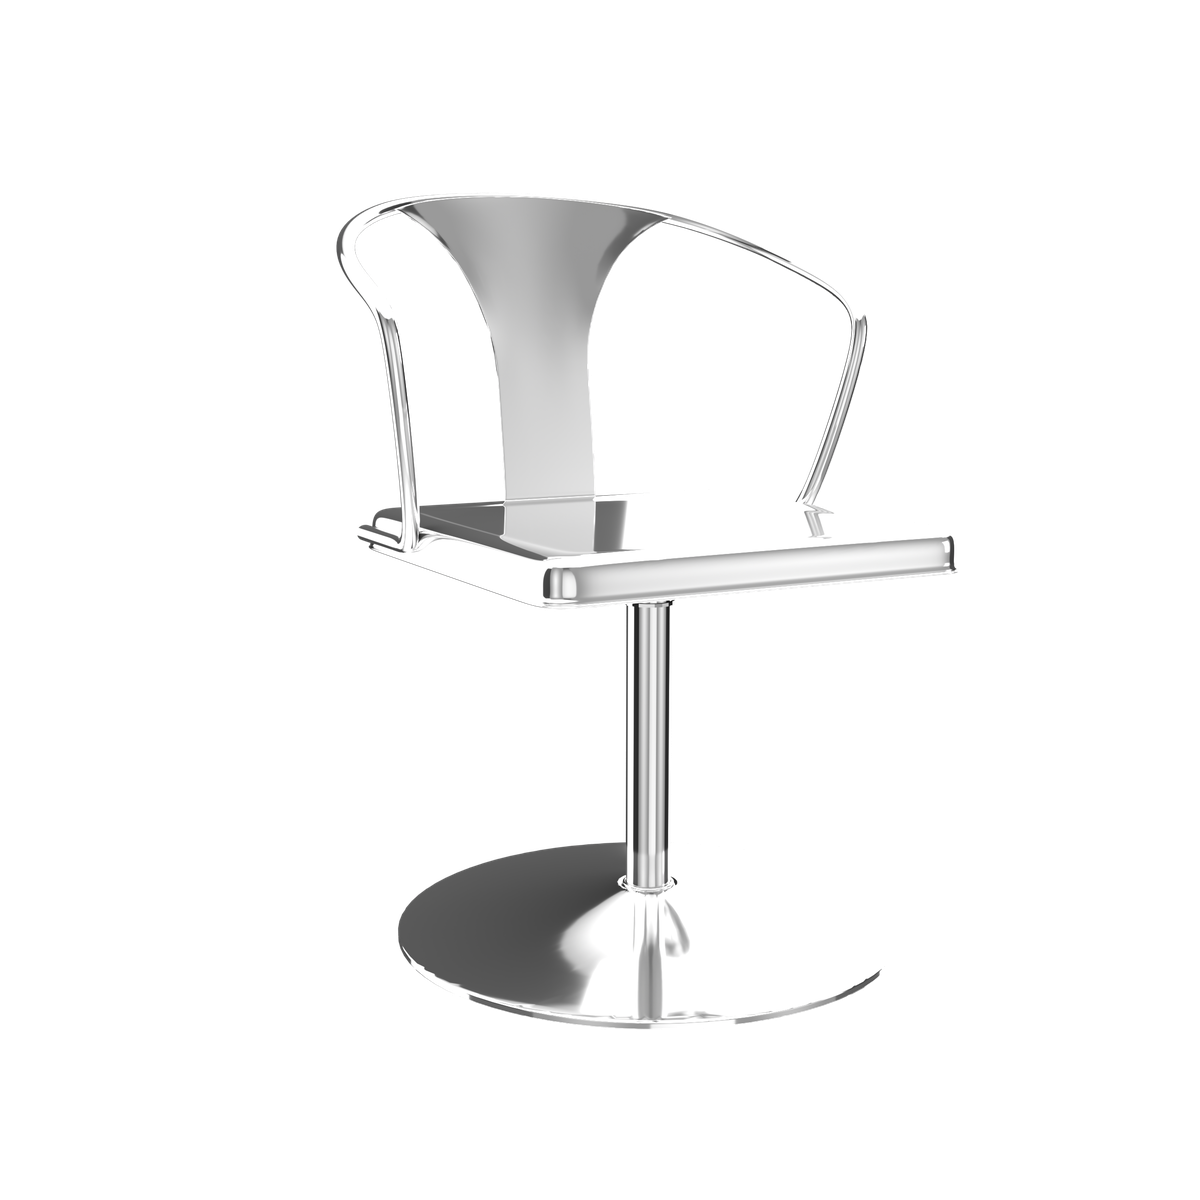  A coated-metal chair with a single leg that attaches to the ground via a round base.